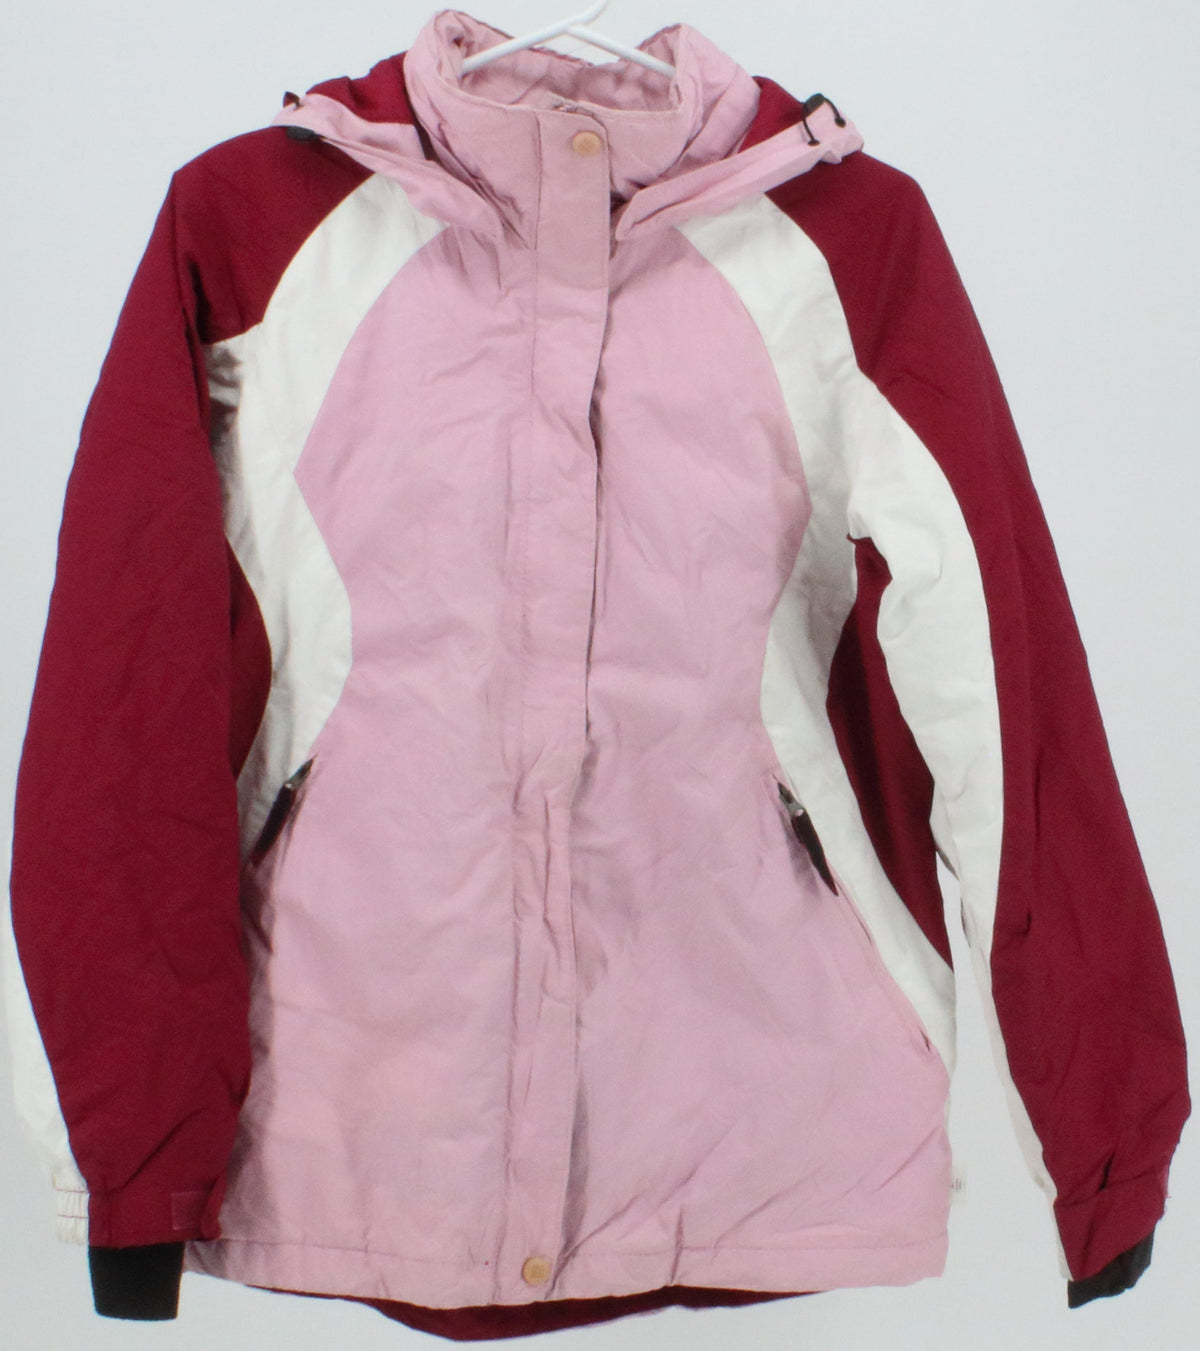 Columbia Women's Dark Pink and Light Pink Insulated Jacket